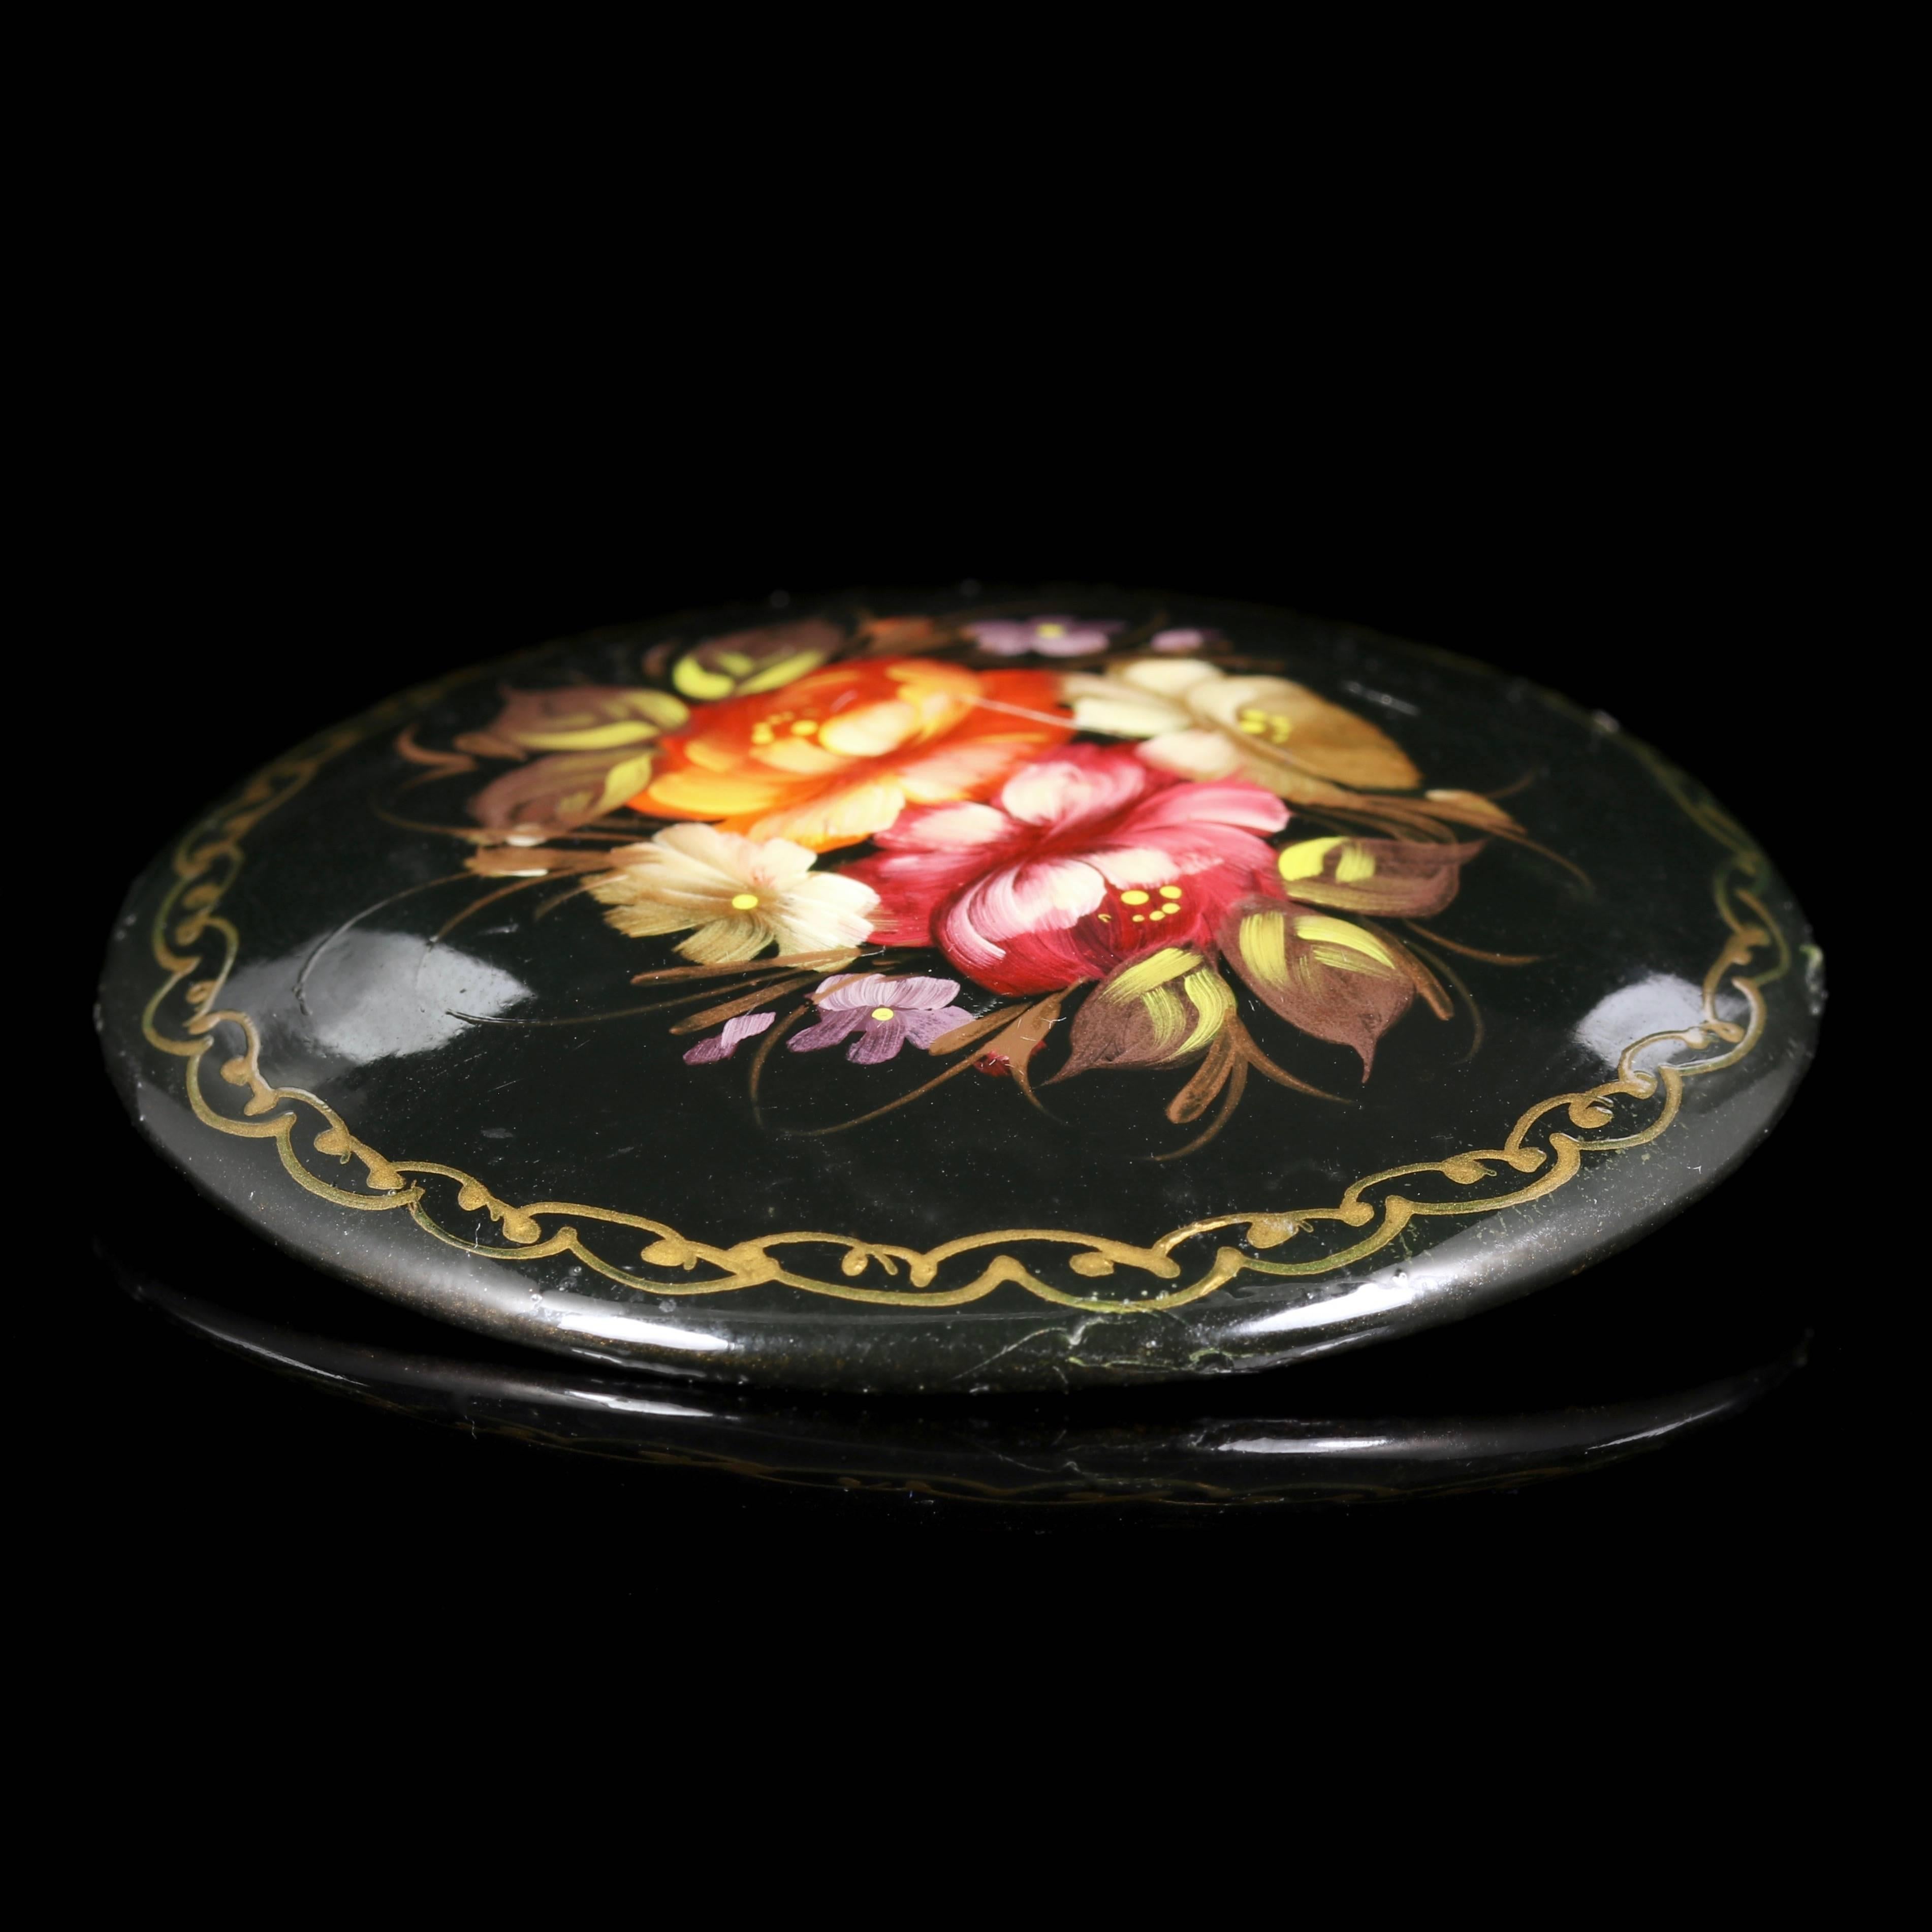 A fabulous Russian hand painted floral brooch that has a signature on the reverse.

This brooch has a very pretty floral design on the front which is hand painted and shines with vibrant colours.

Papier-mâché is a composite material consisting of